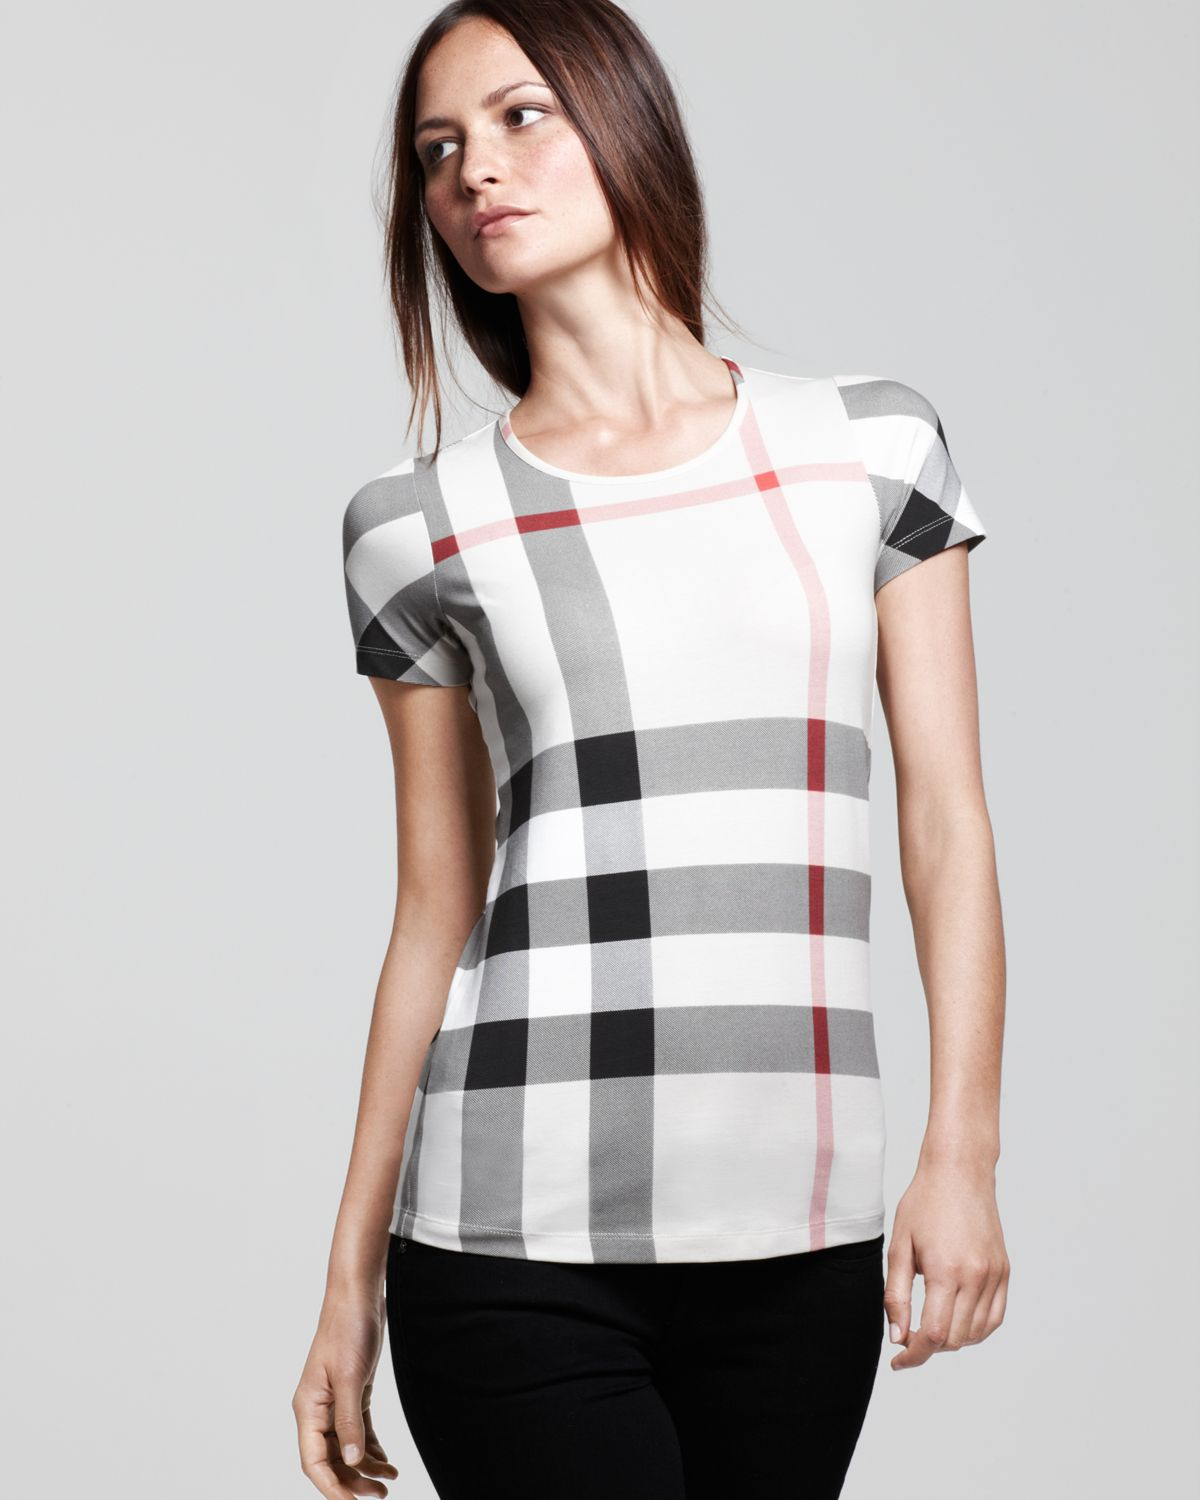 Burberry Brit All Over Check Tee in 